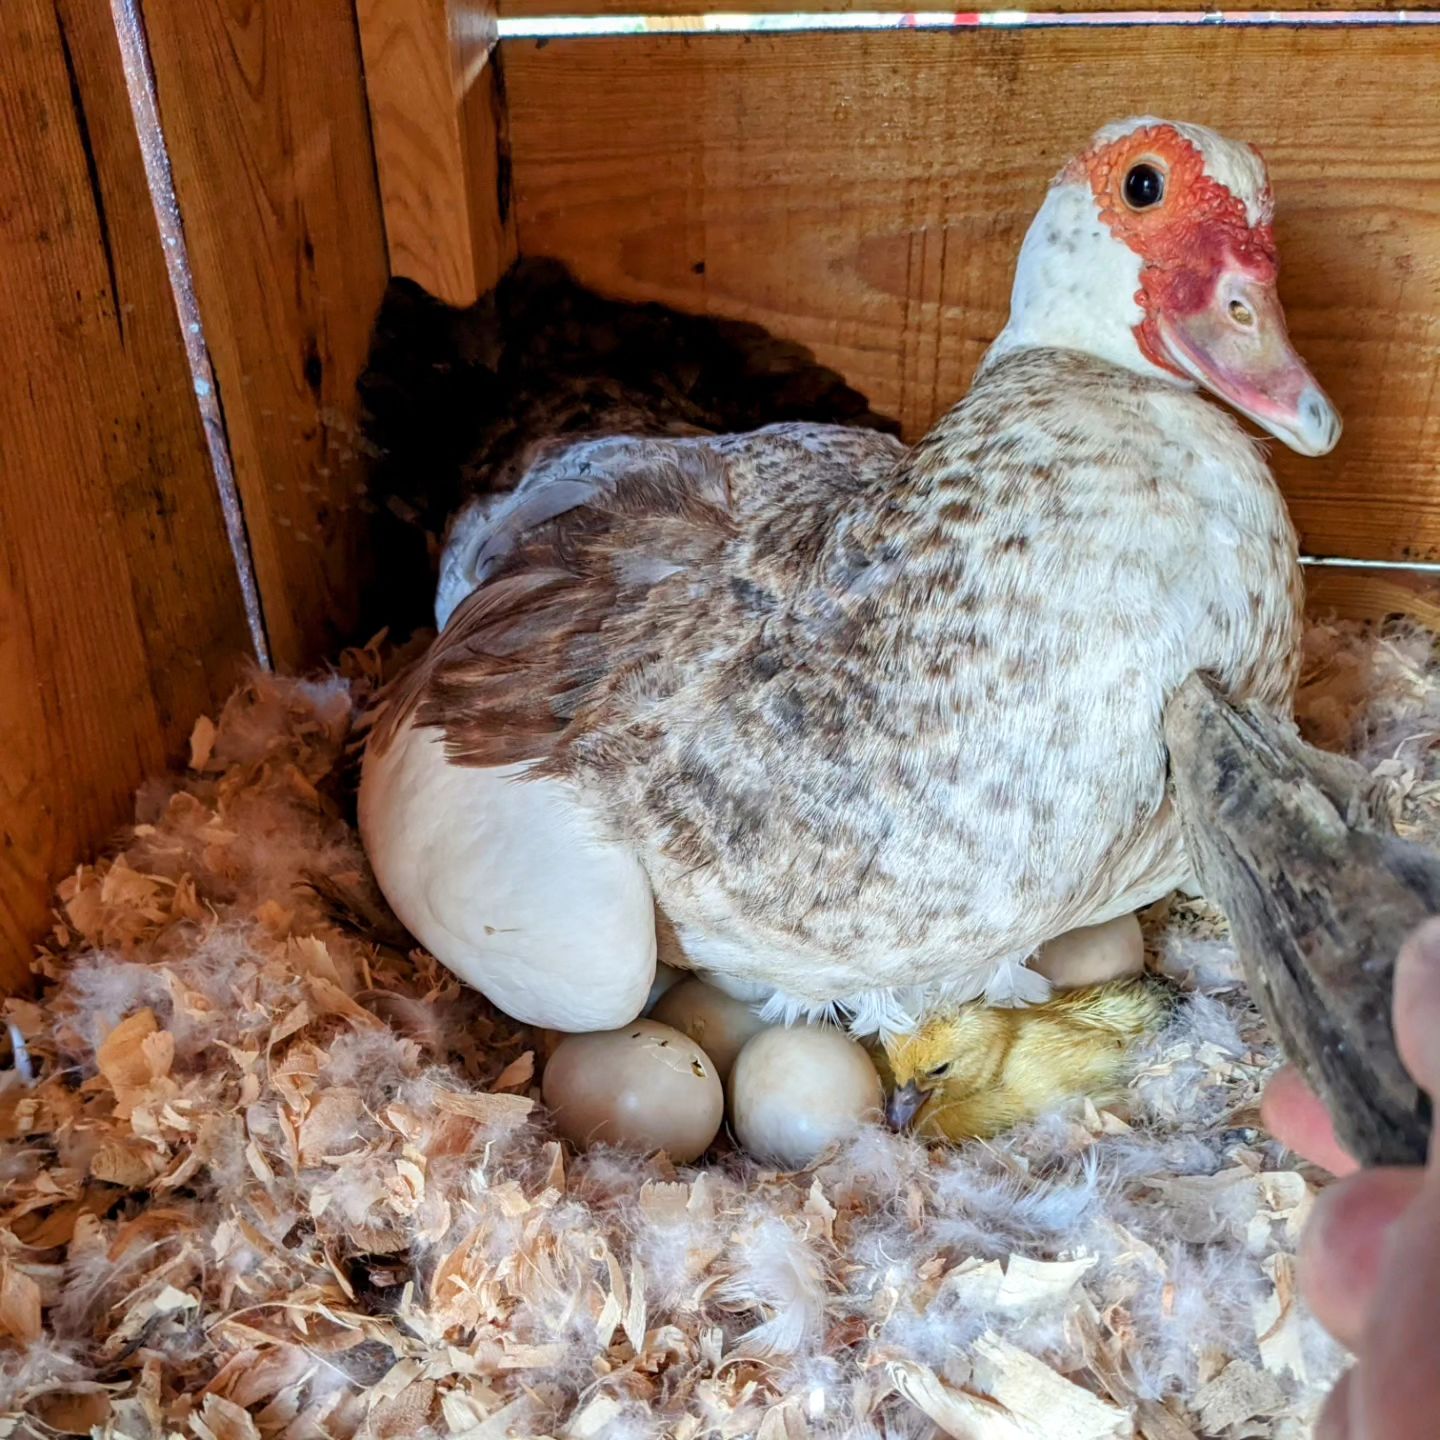 A couple days earlier than expected, the first duckling hatched under the sitting Muscovy